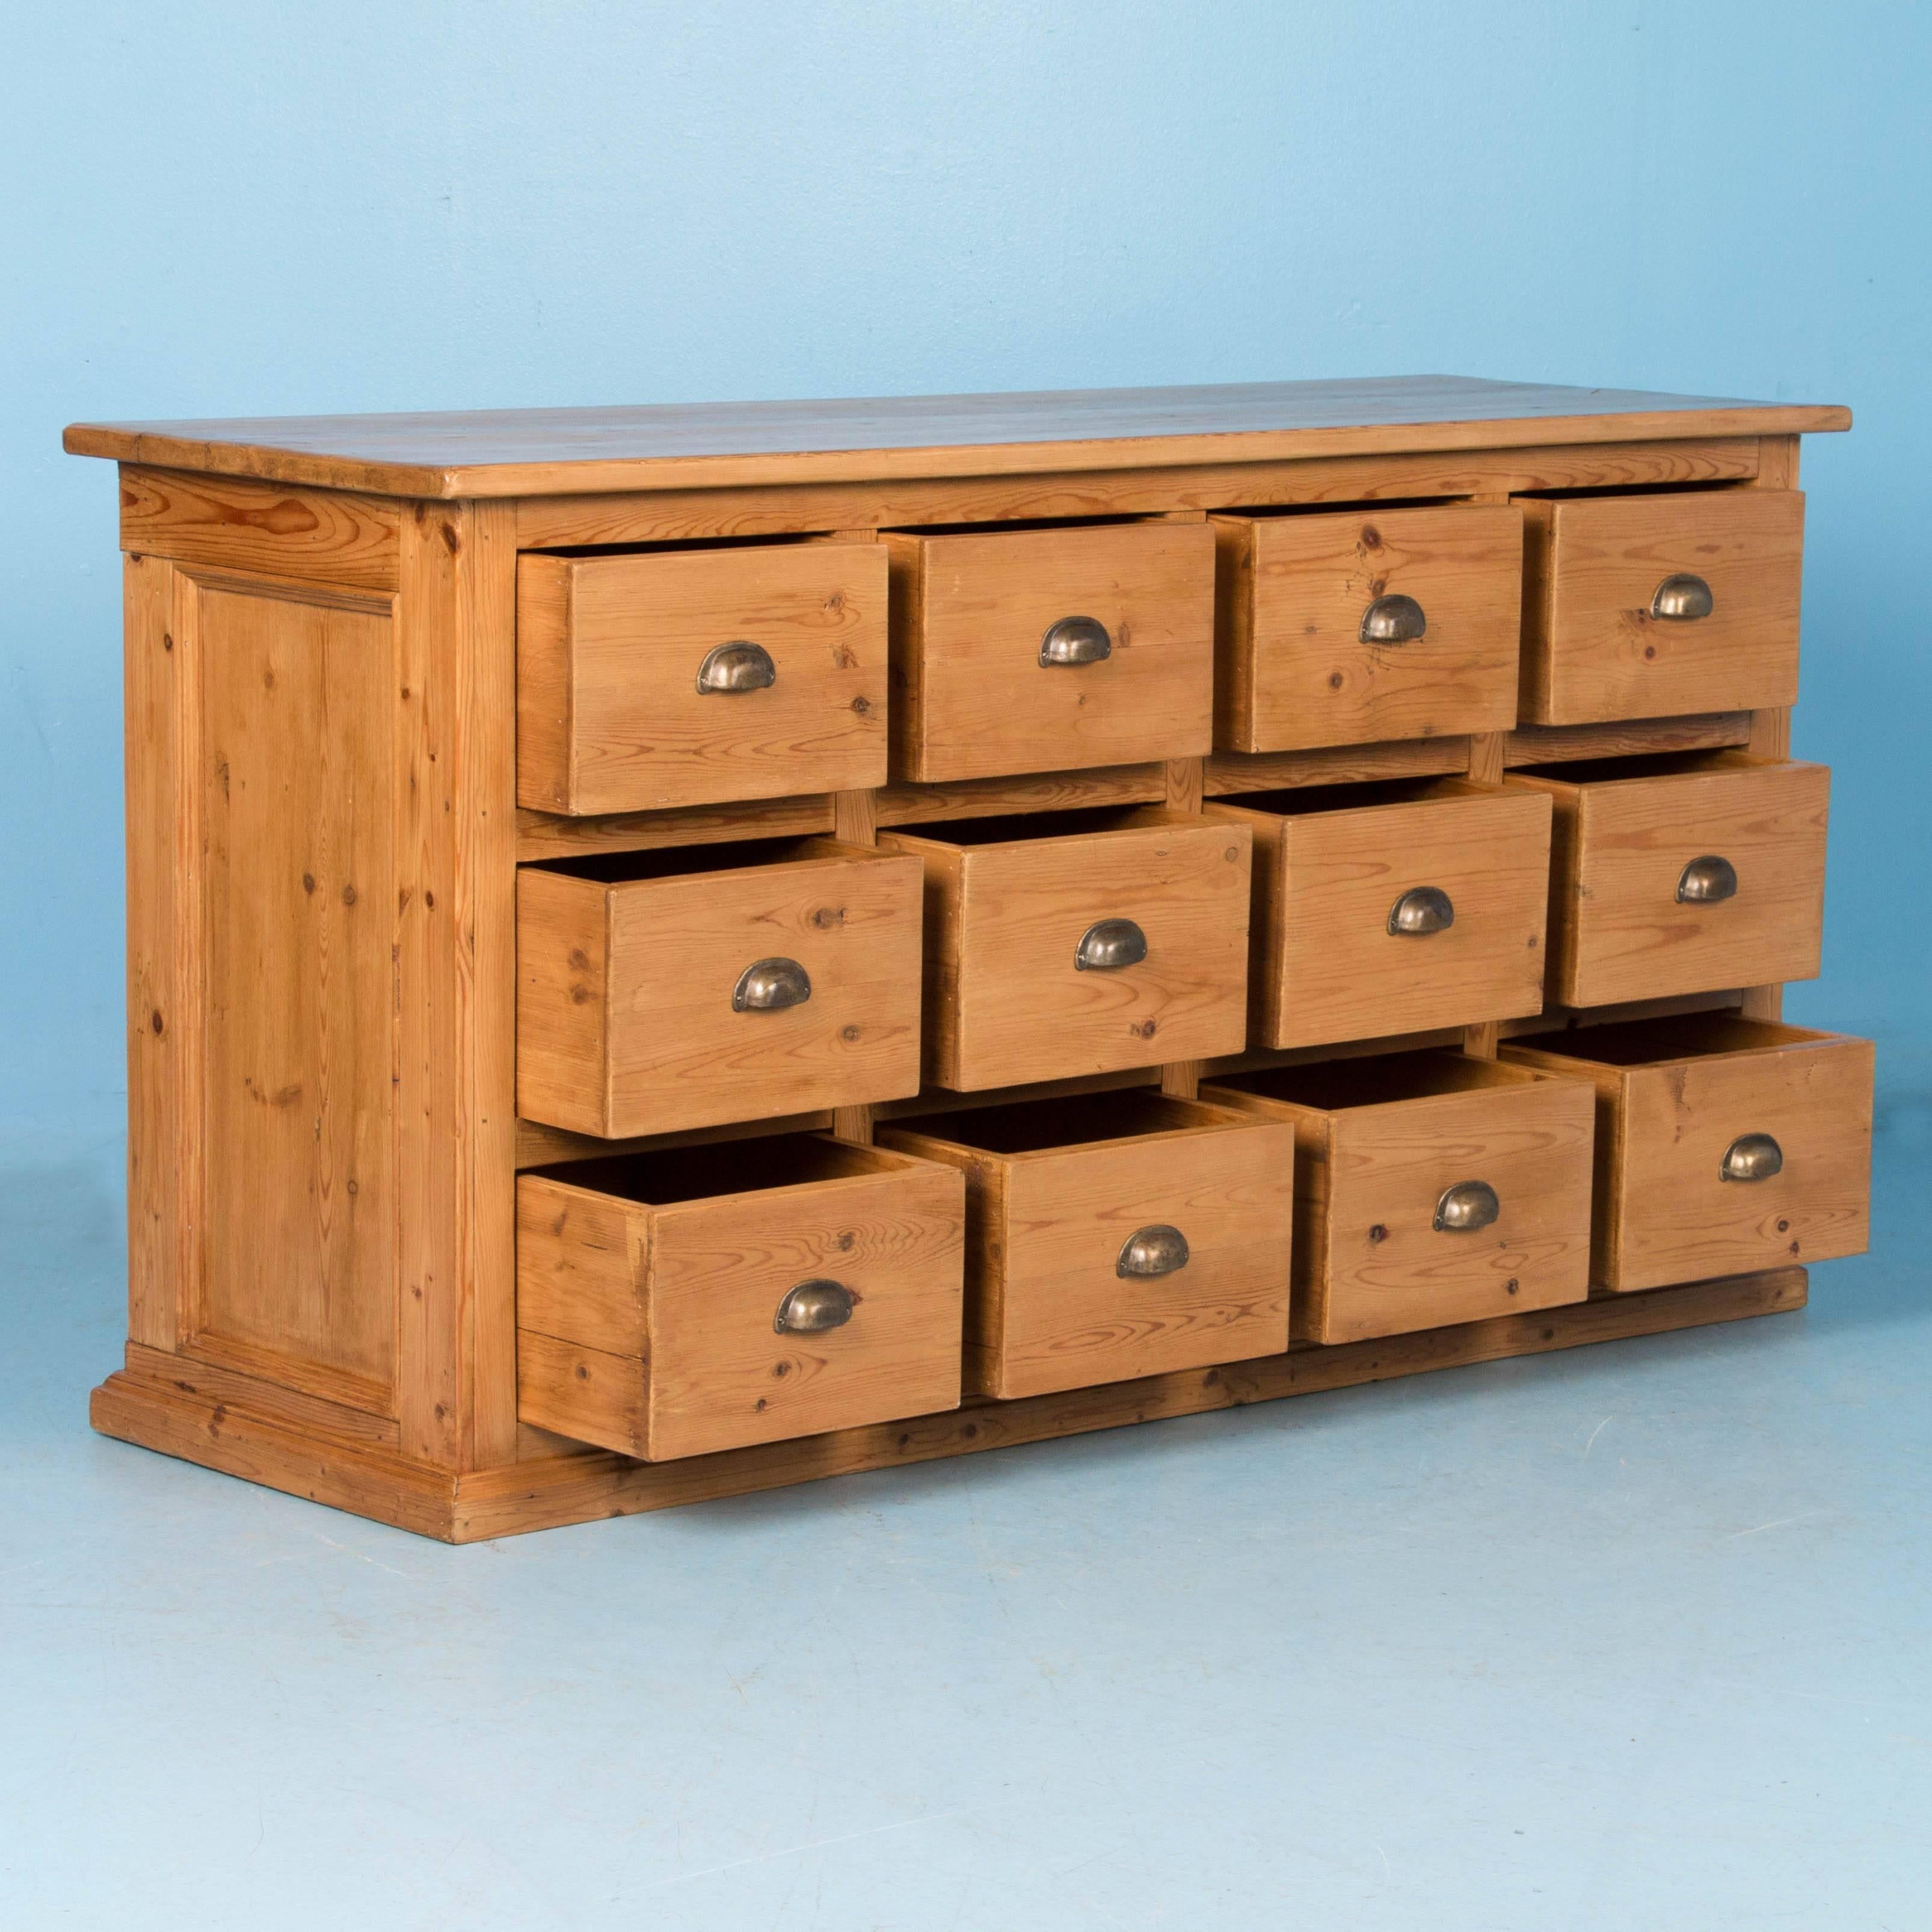 Unique and versatile, this antique pine cabinet was made to be viewed from all sides, with vertical panels on the ends and back. Originally used as a grocer's store counter, the 12 drawers offer ample storage, making for the perfect kitchen island